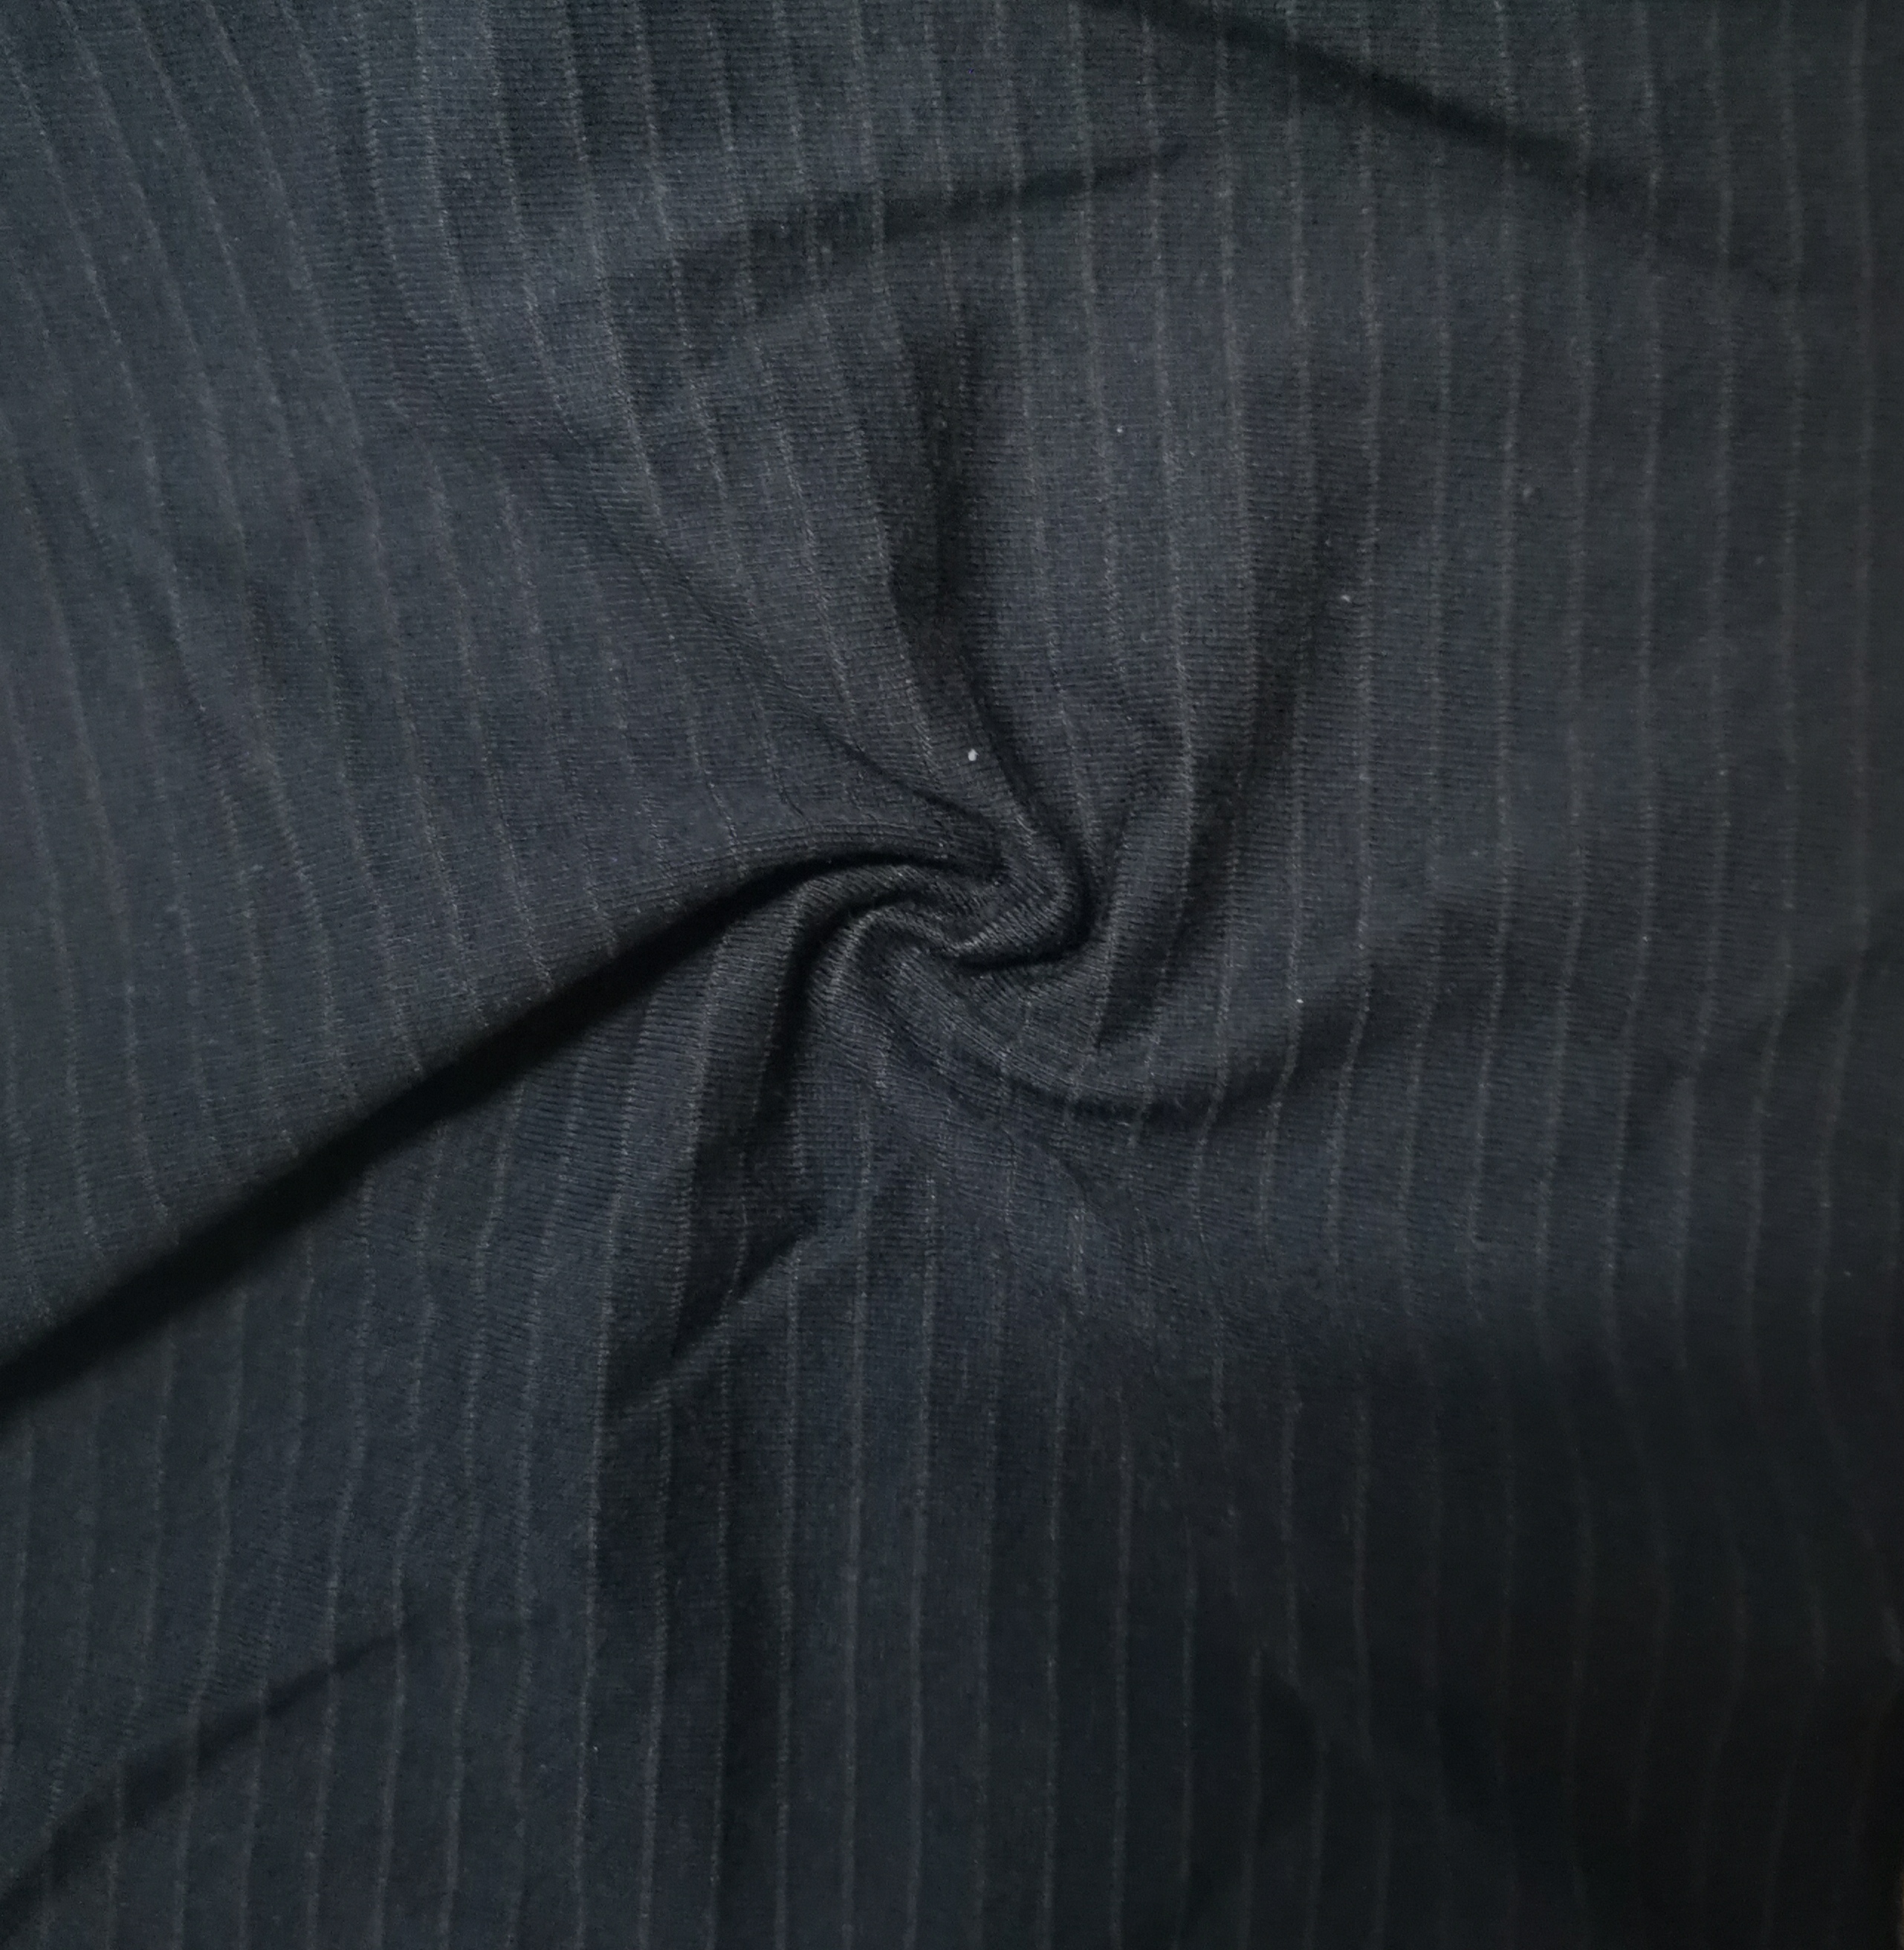 Washable Anti-static Fabric for Anti-static Work Clothes